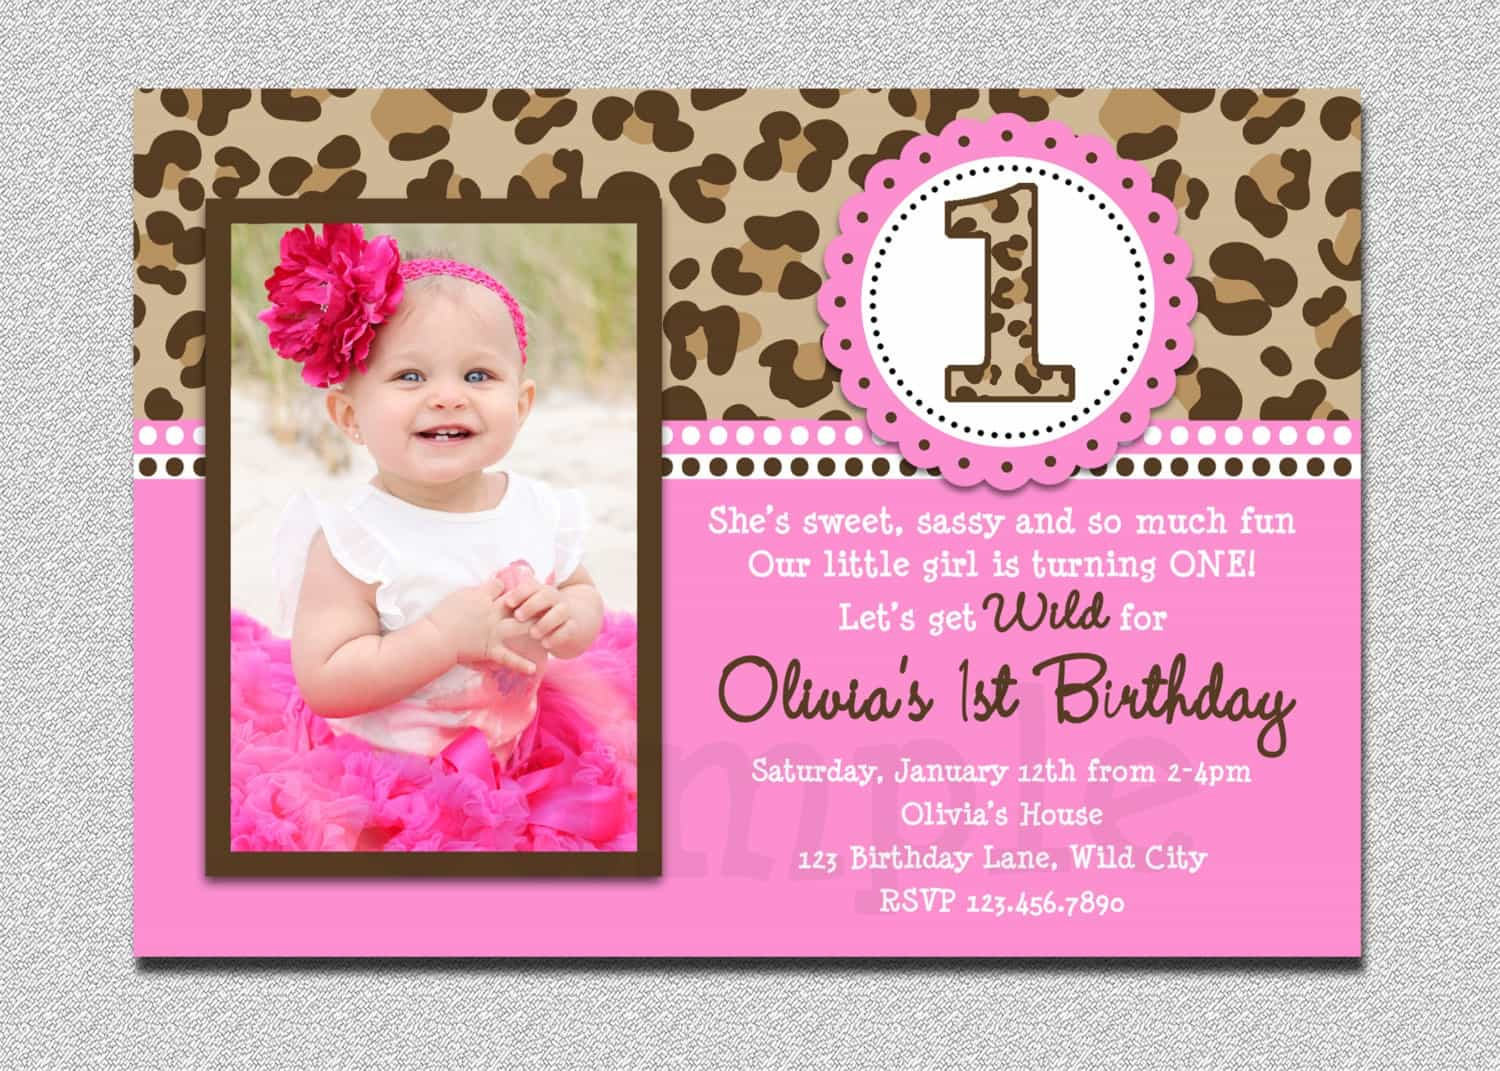 Walgreens Birthday Cards
 Best Walgreens Party Invitations Ideas beauteous